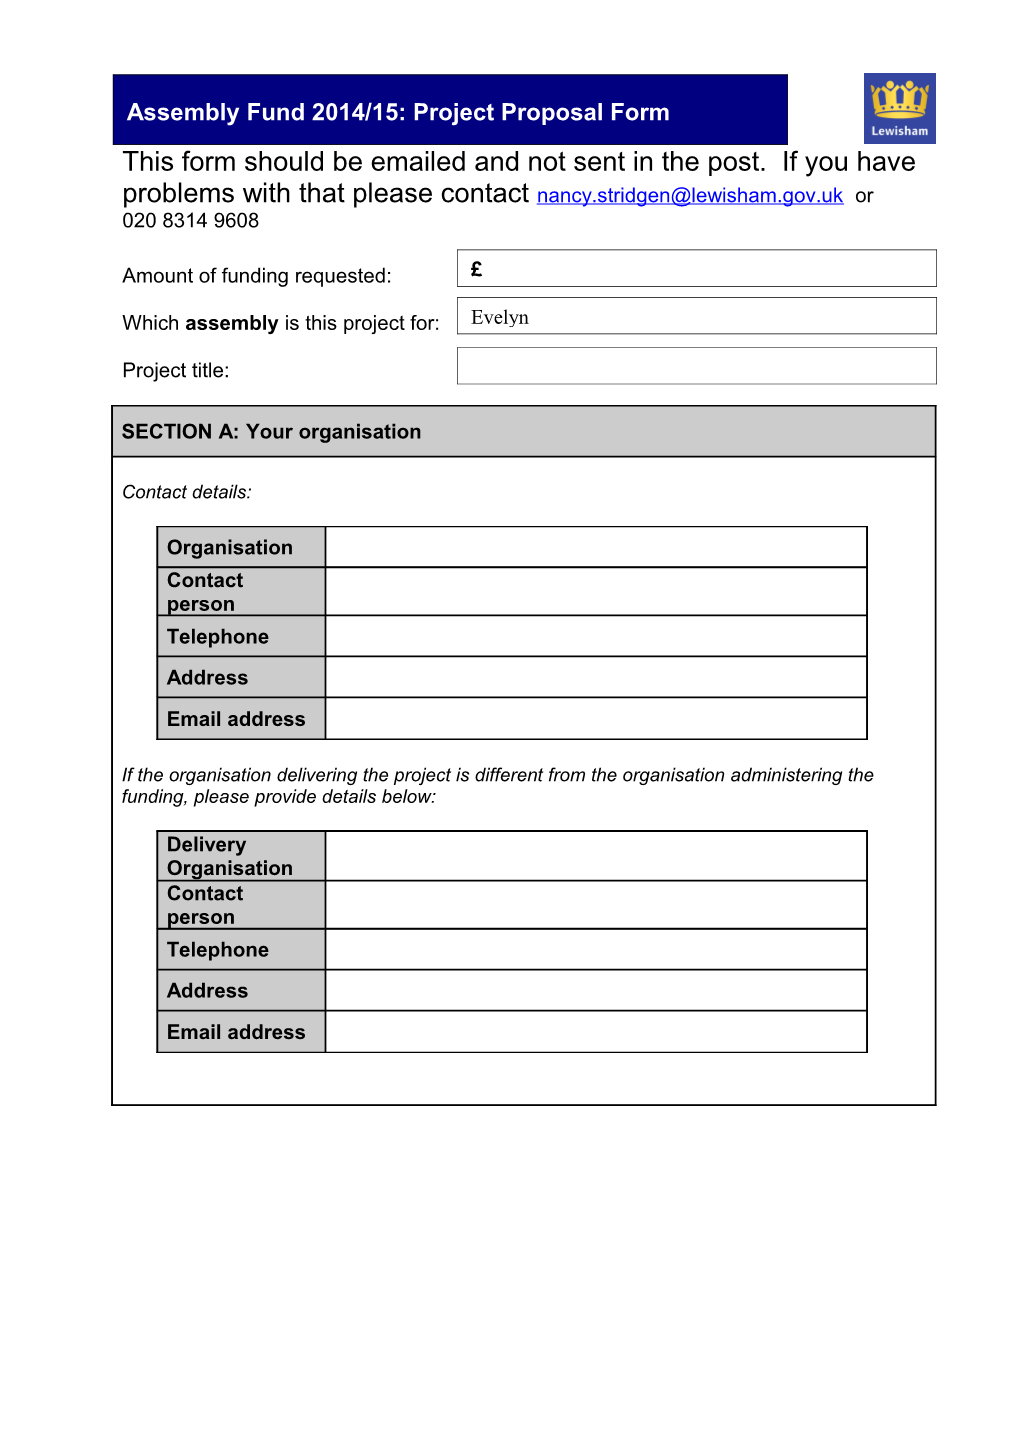 Evelyn Assembly Applipcation Form 2014/15